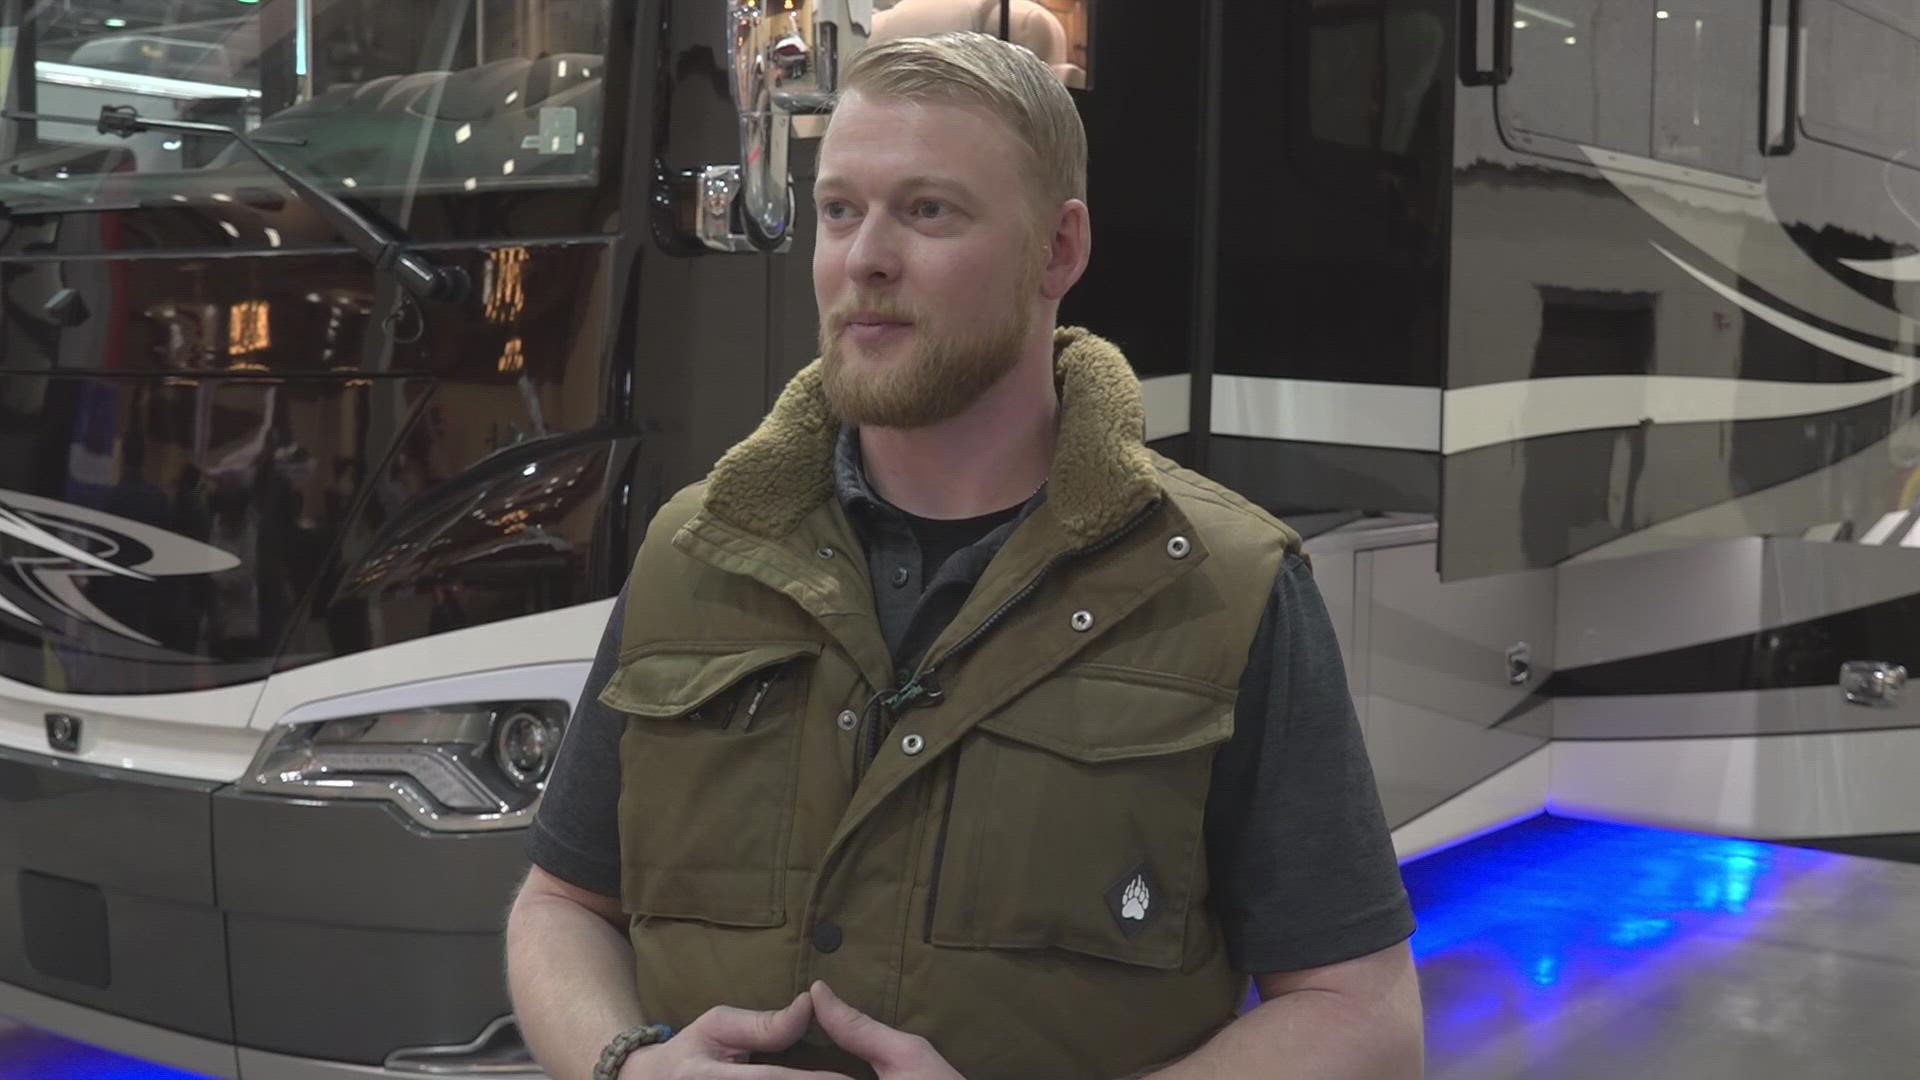 RV sales are on the rise, with big shows bringing in potential new customers.